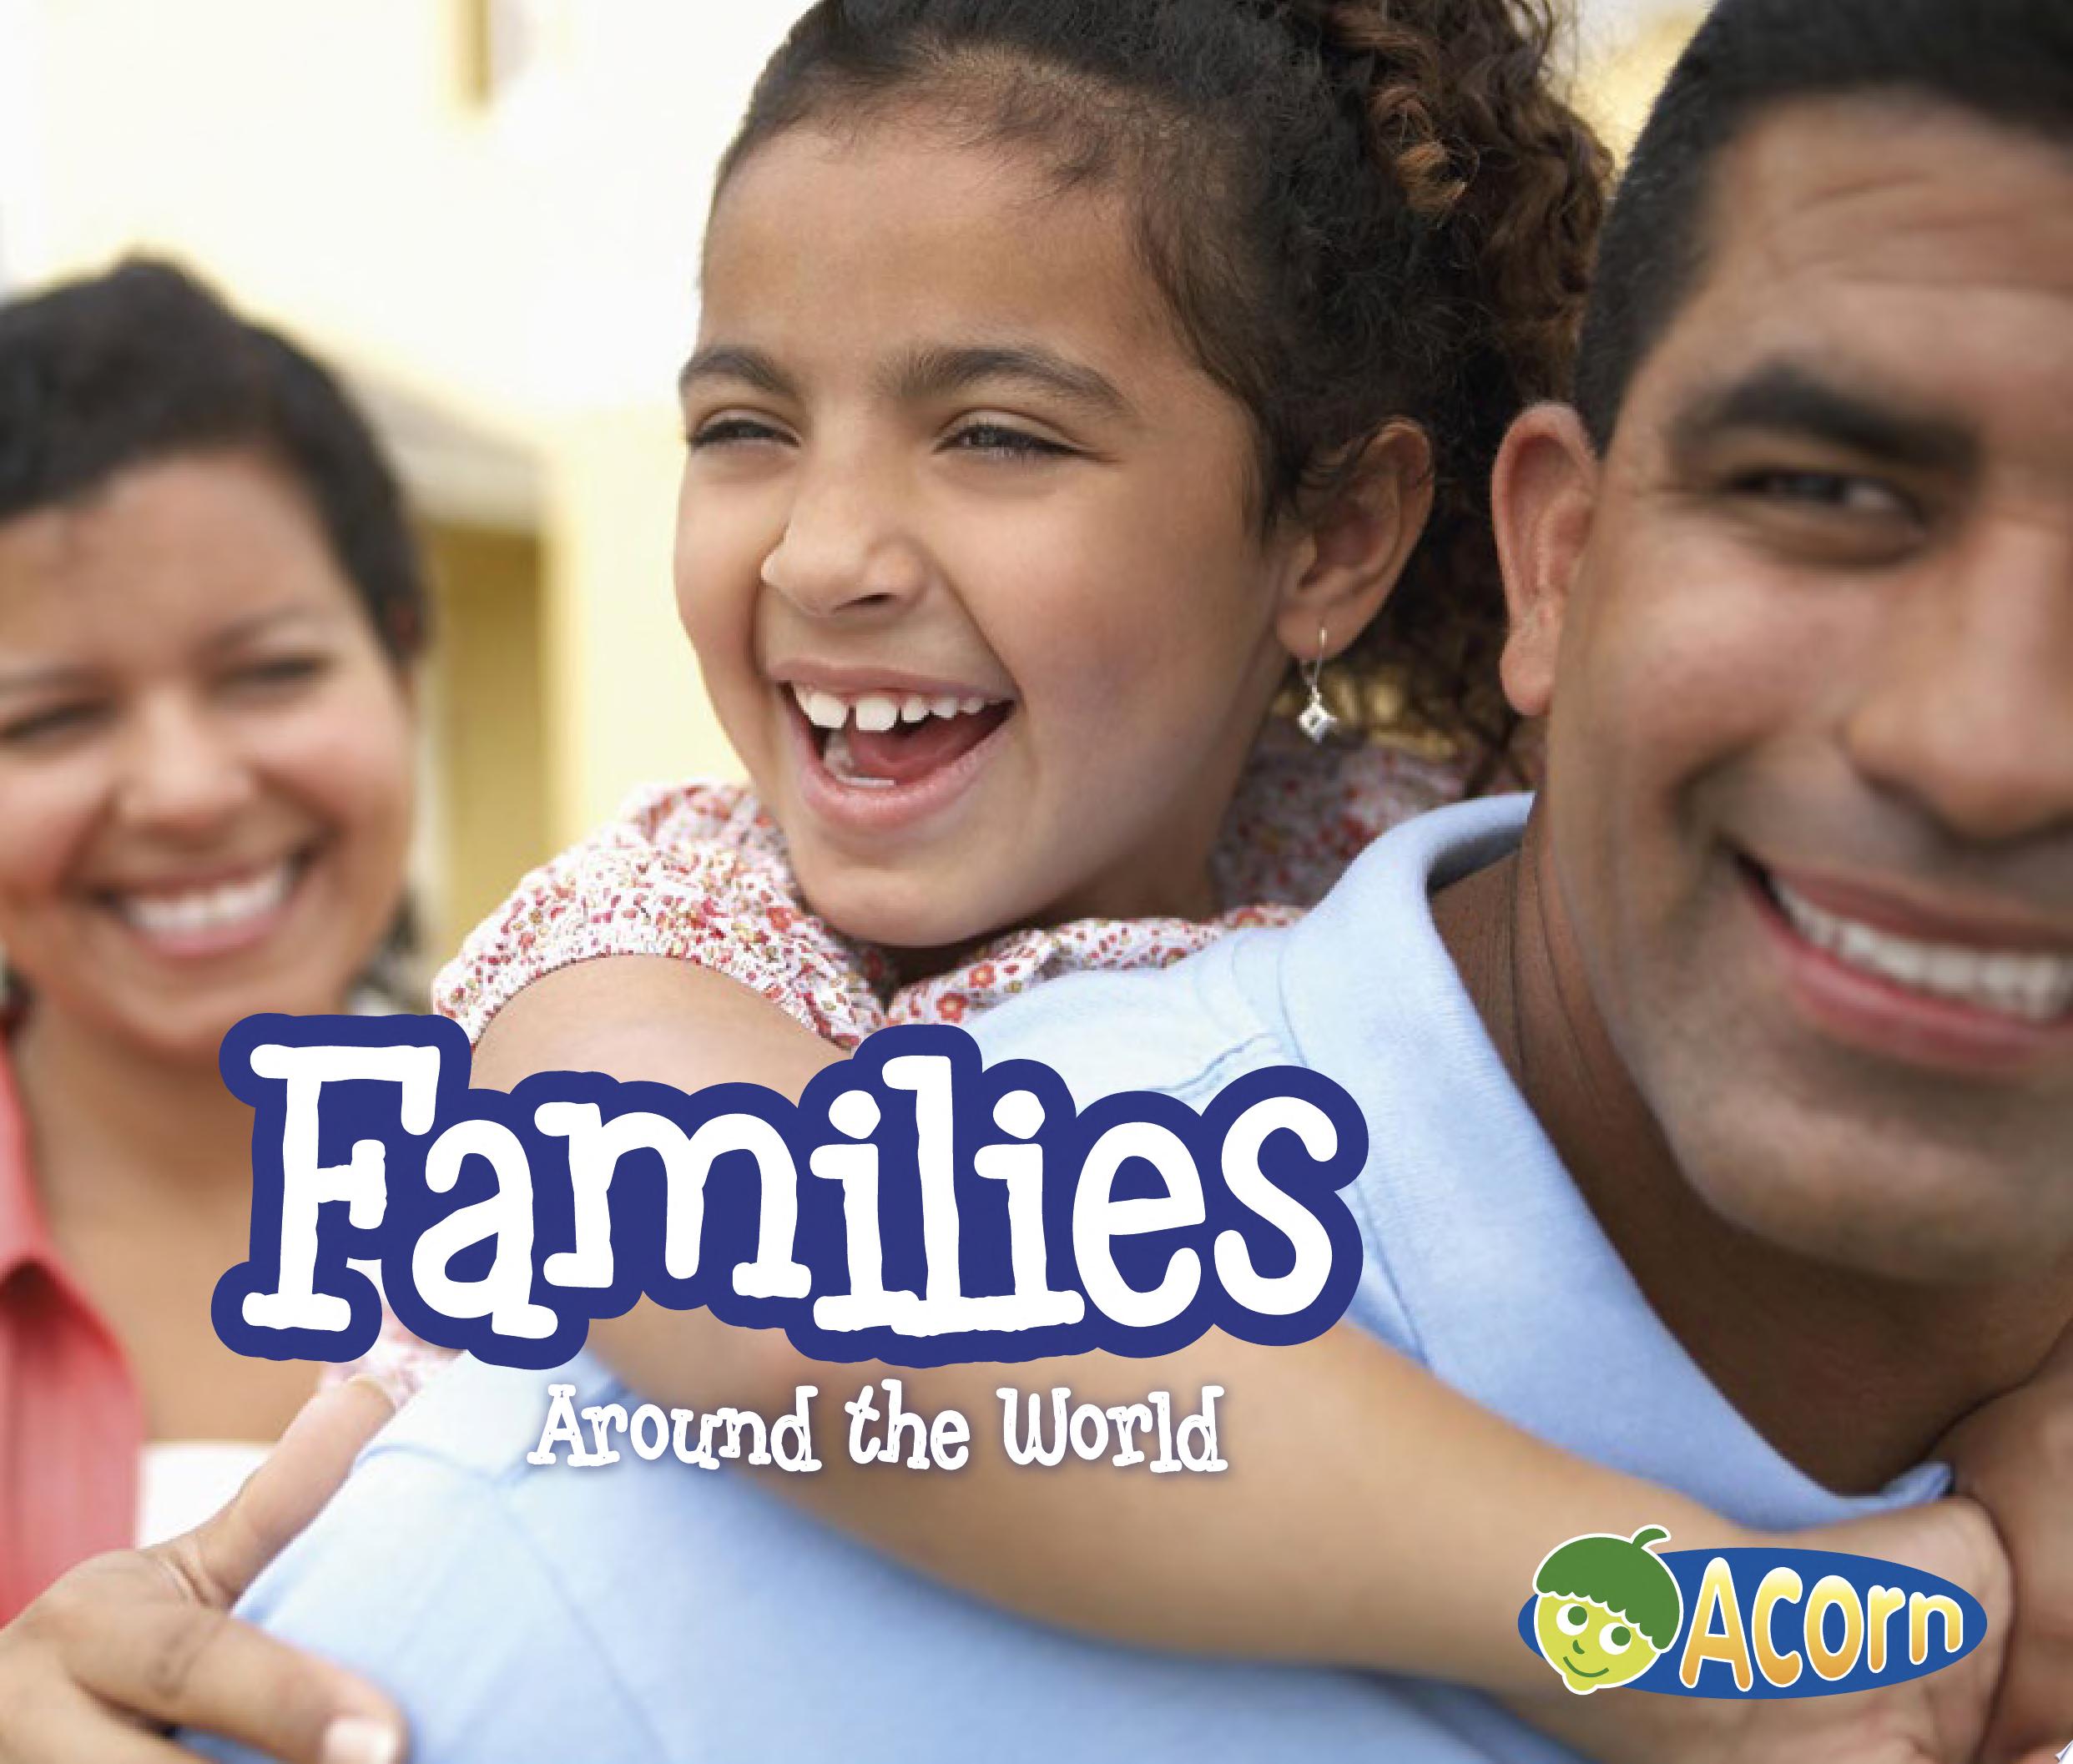 Image for "Families Around the World"